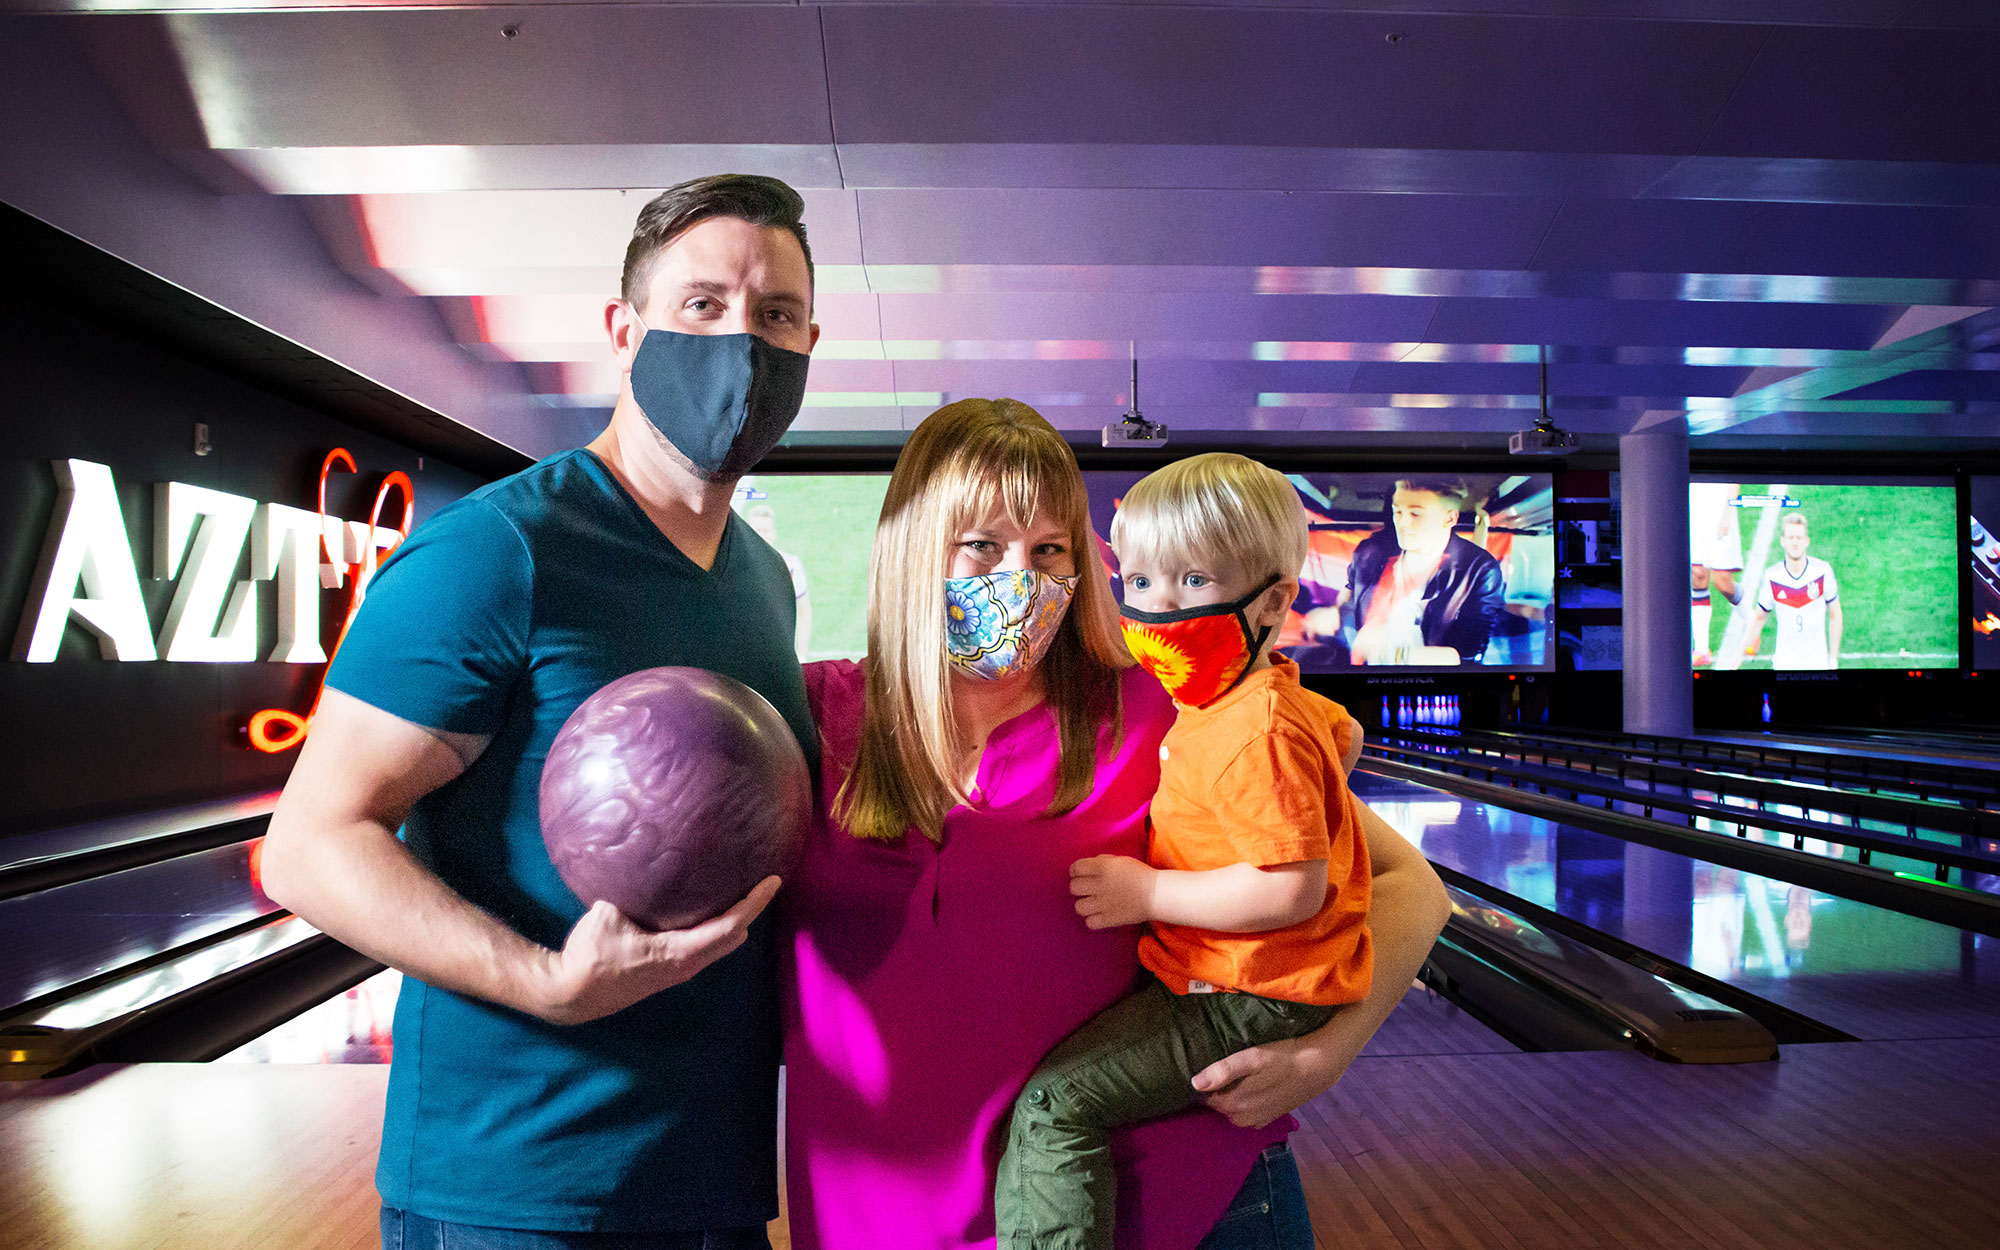 Mod, dad and kid bowling while wearing face masks